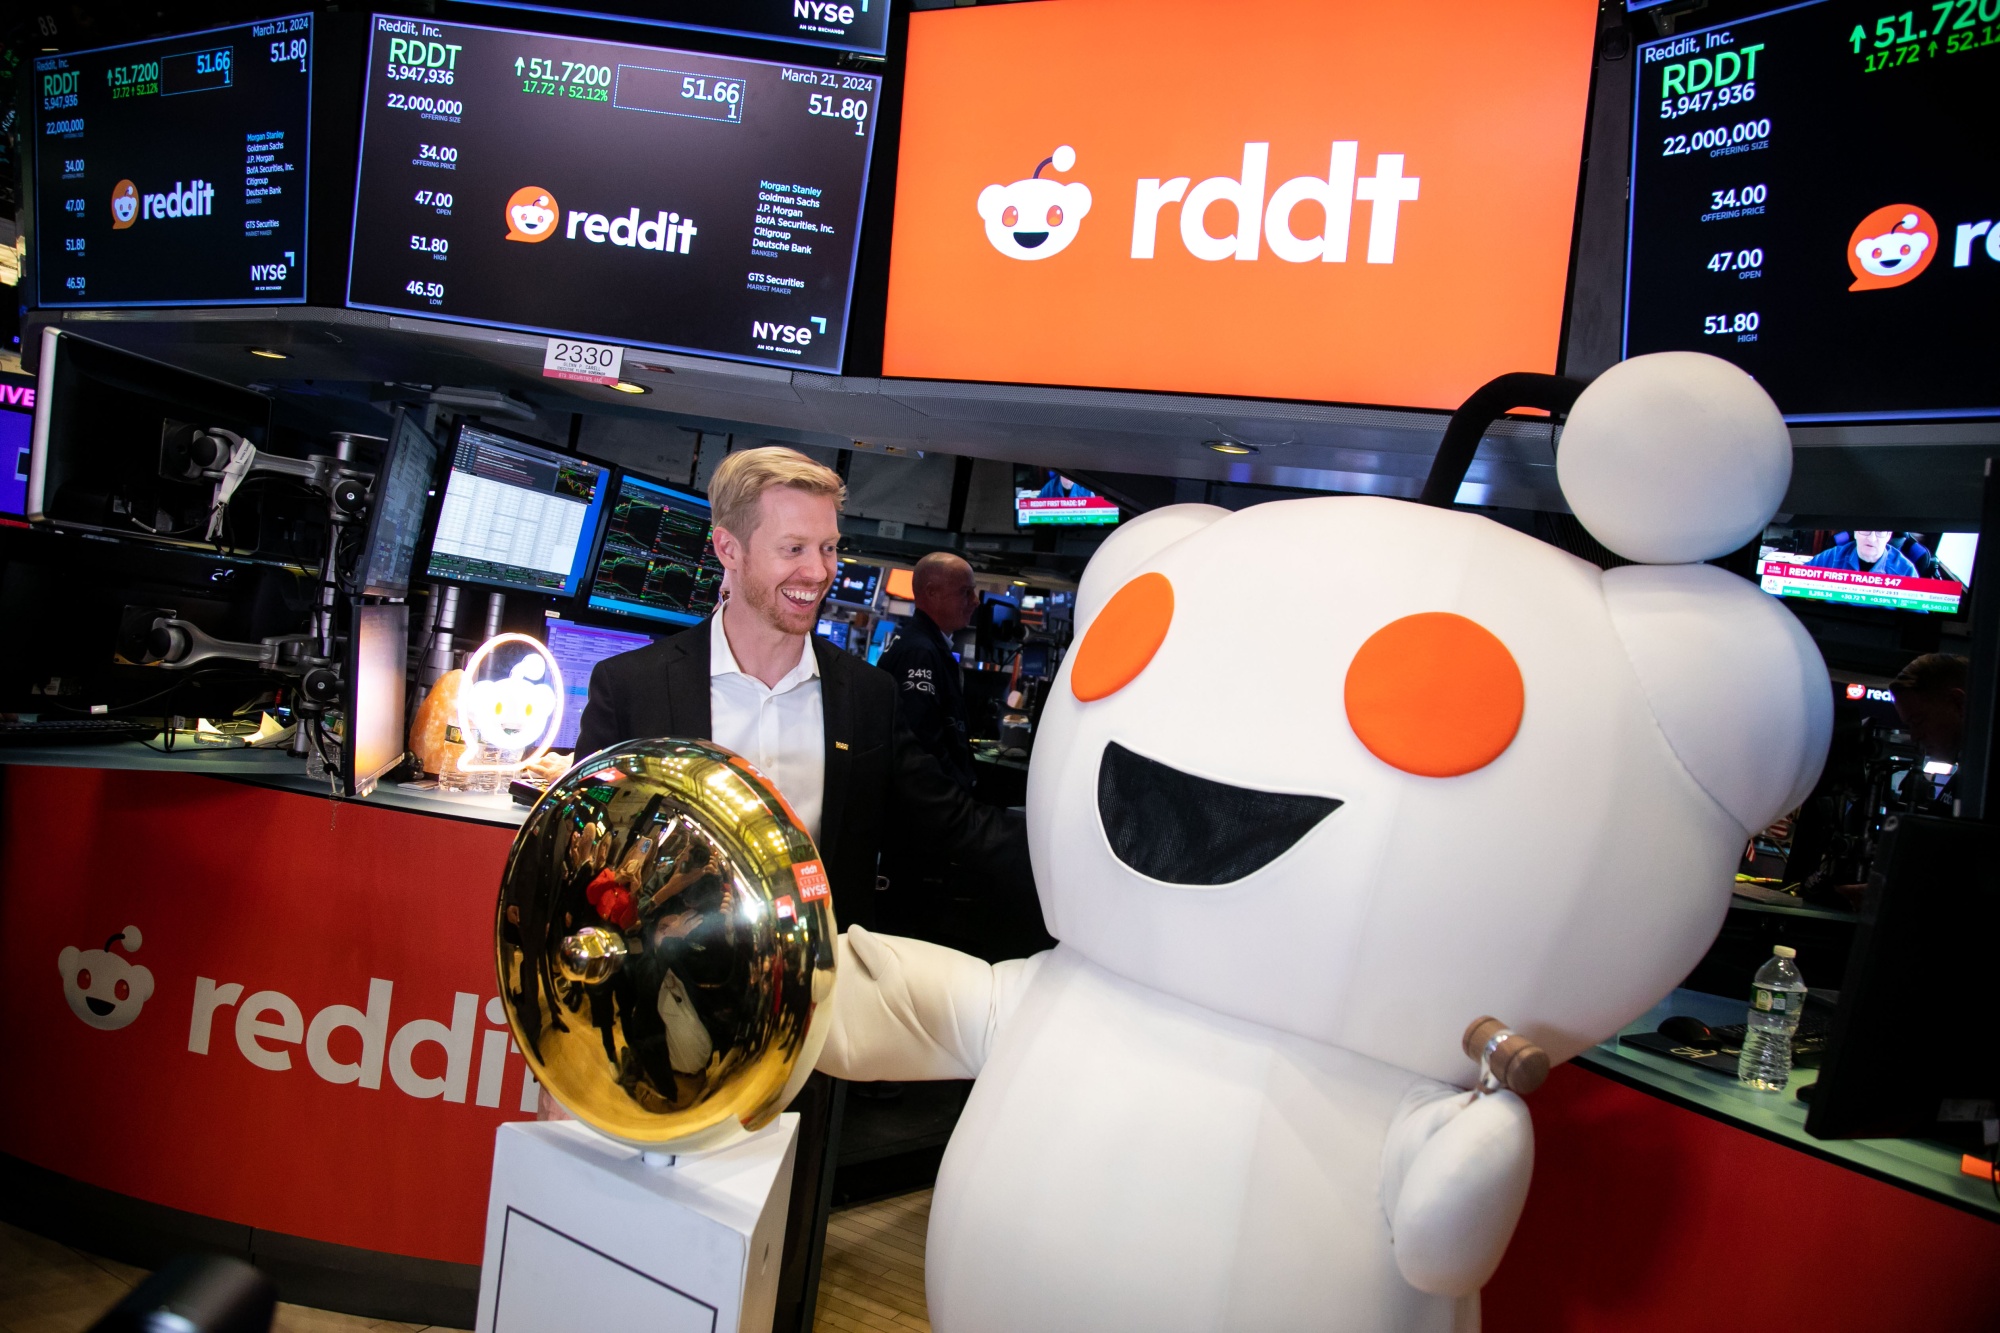 Steve Huffman, co-founder and chief executive officer of Reddit Inc. during the company's initial public offering.